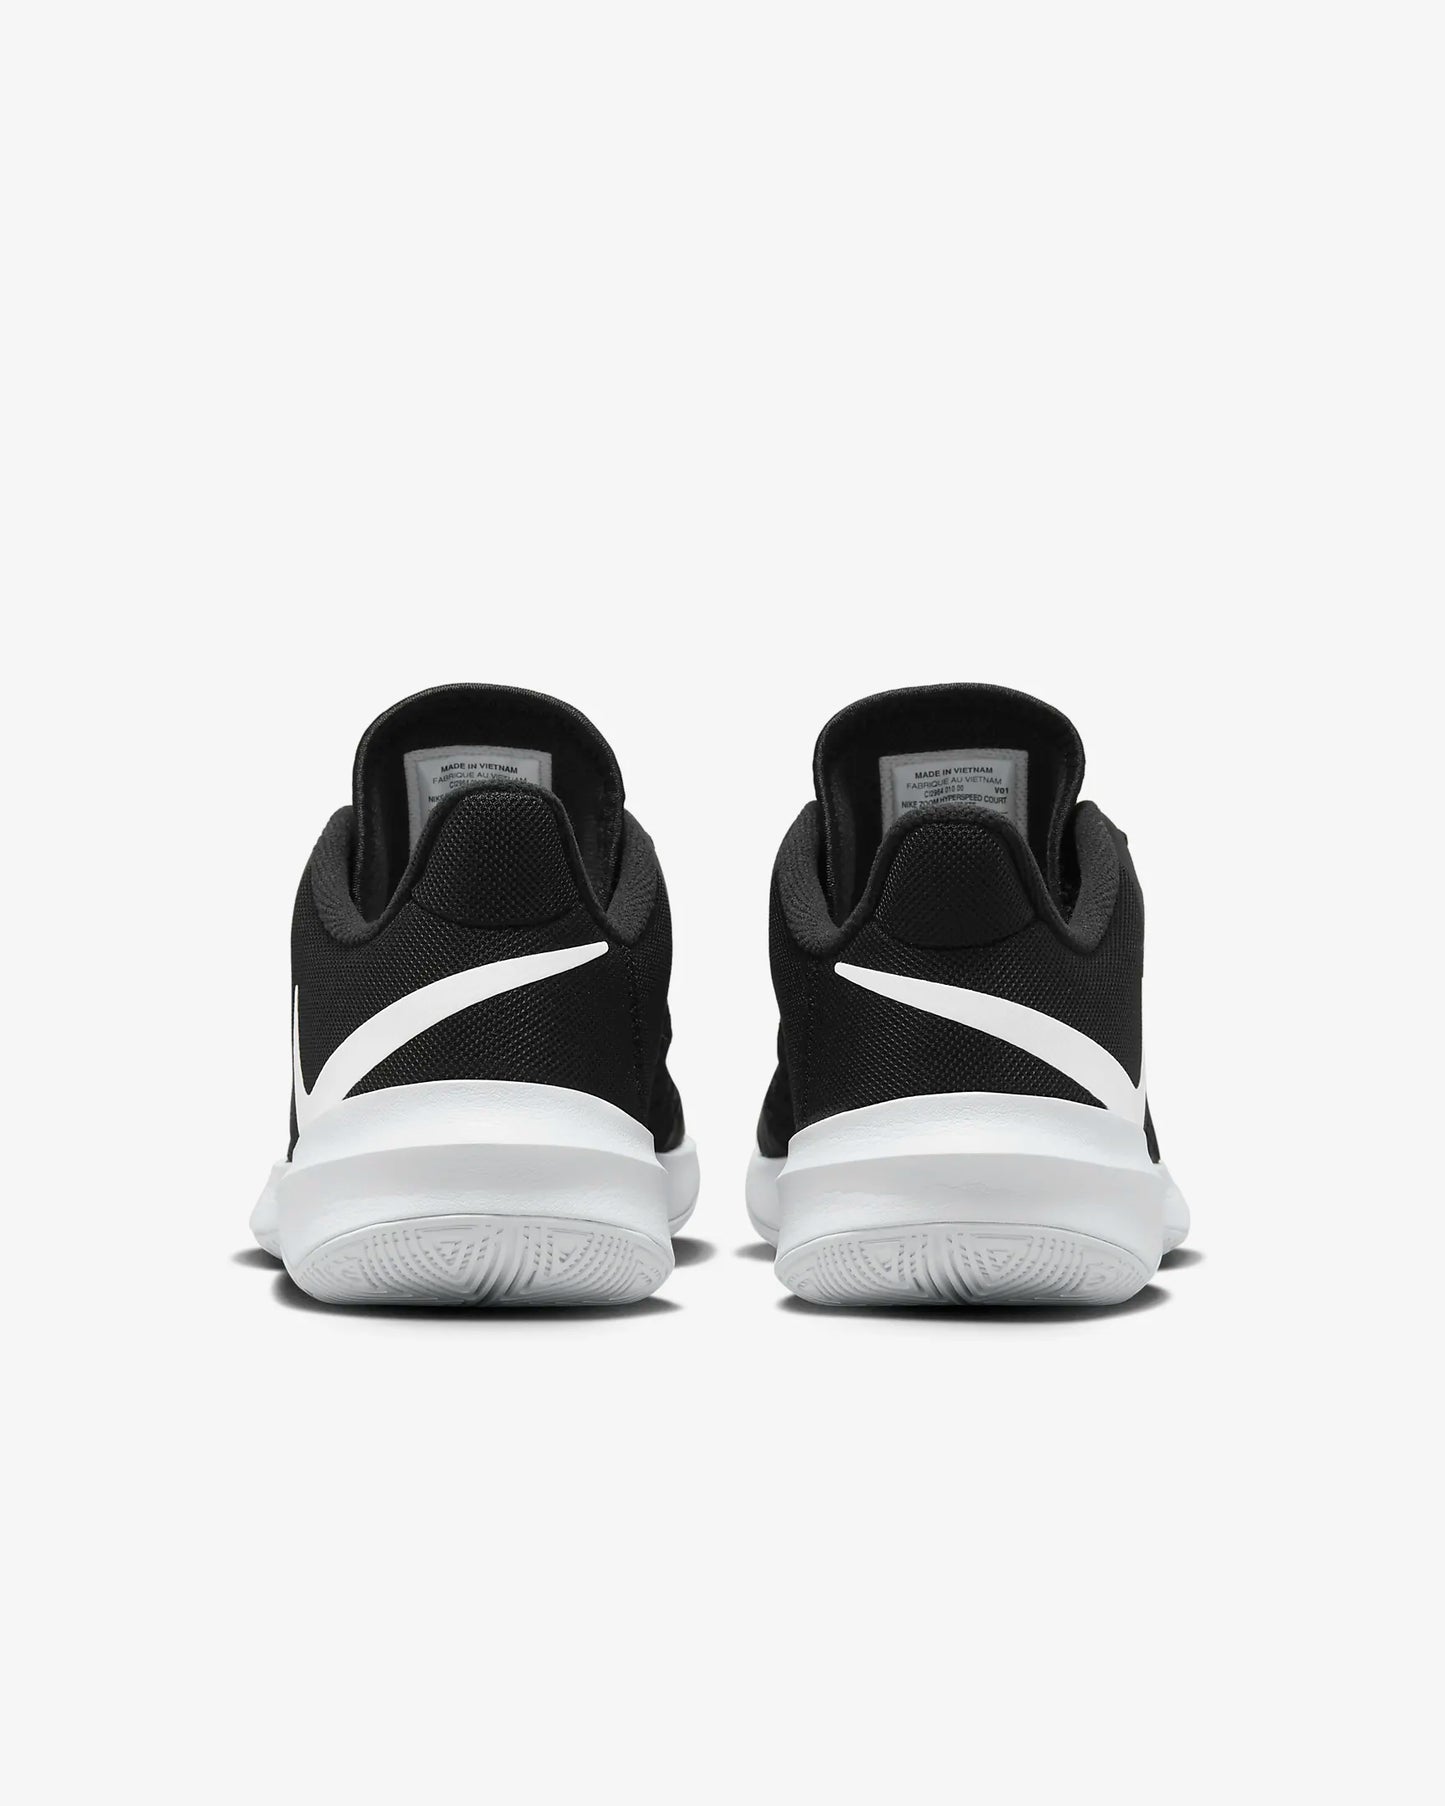 Nike Zoom Hyperspeed court Shoes (Black)